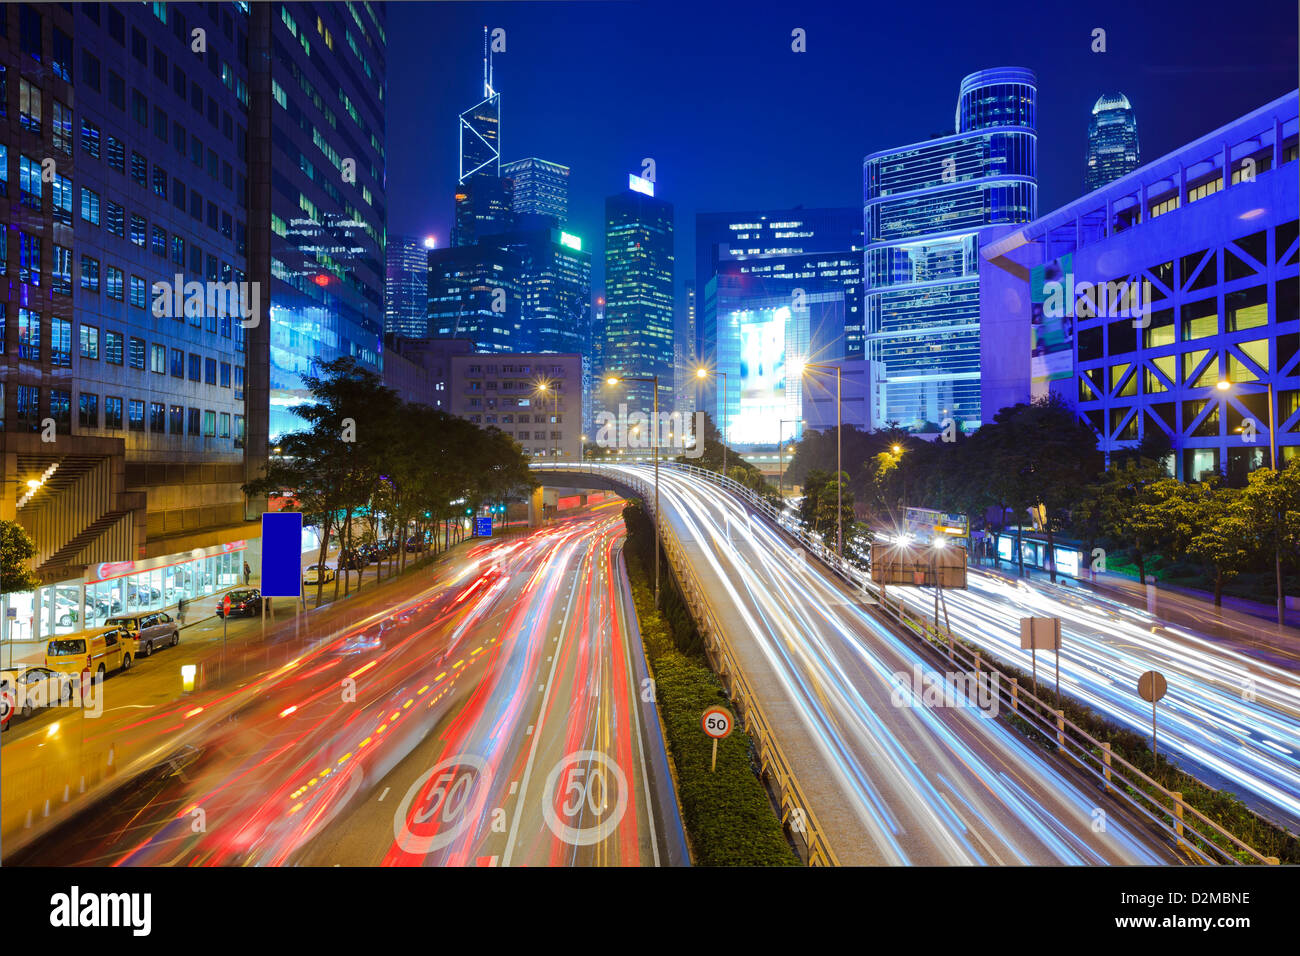 Traffic in city at night Stock Photo